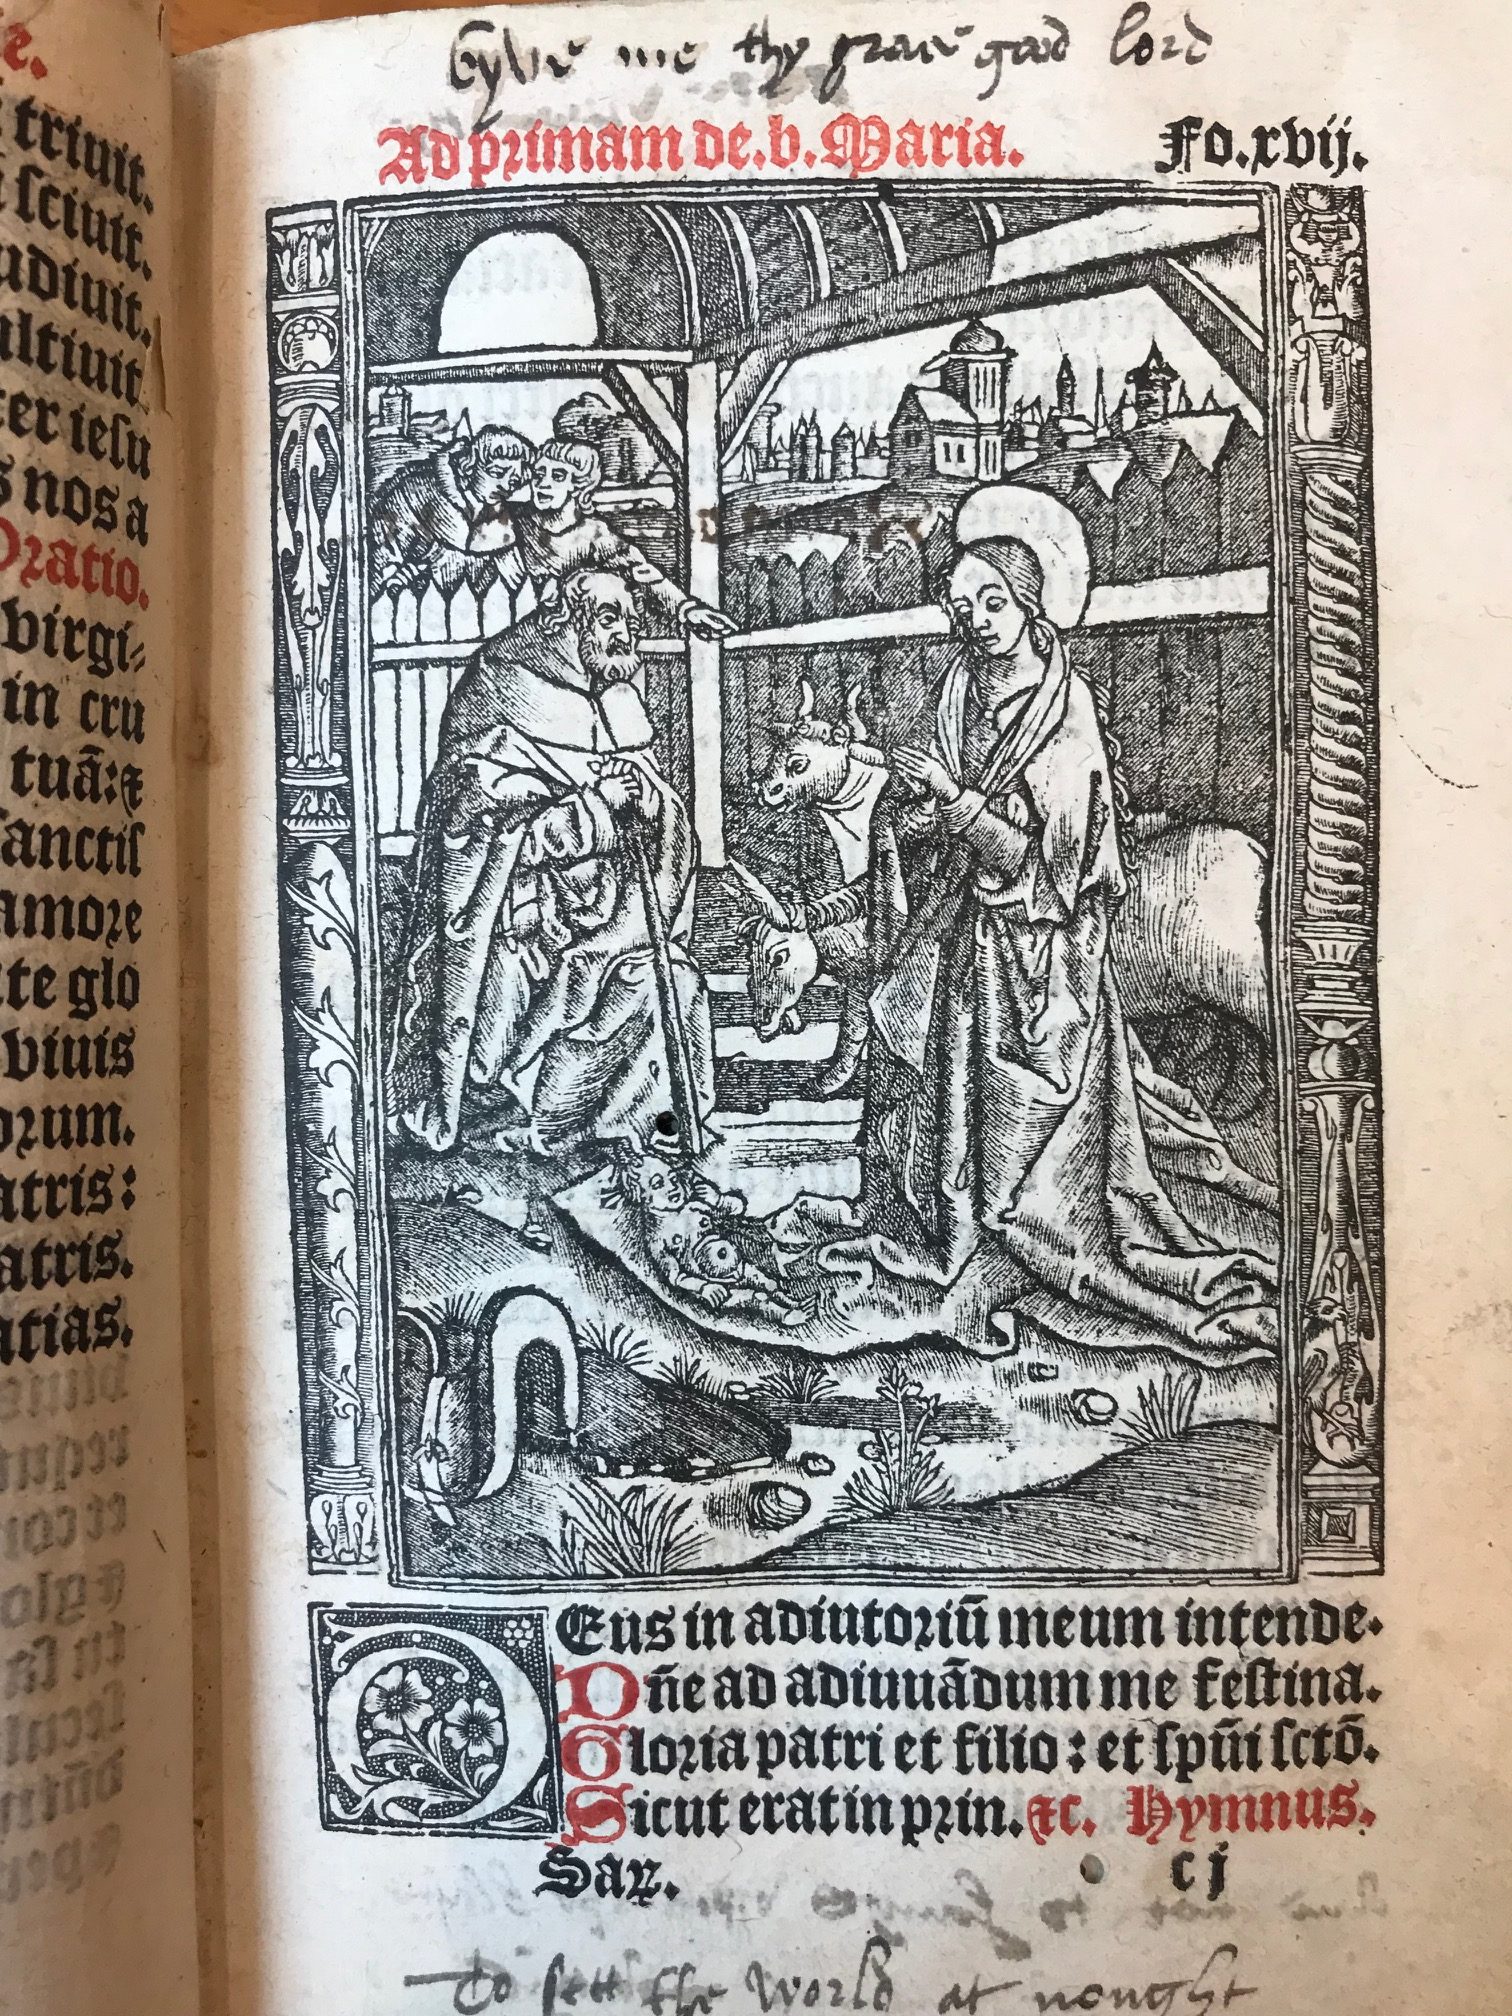 Professor releases collection of Thomas More’s works